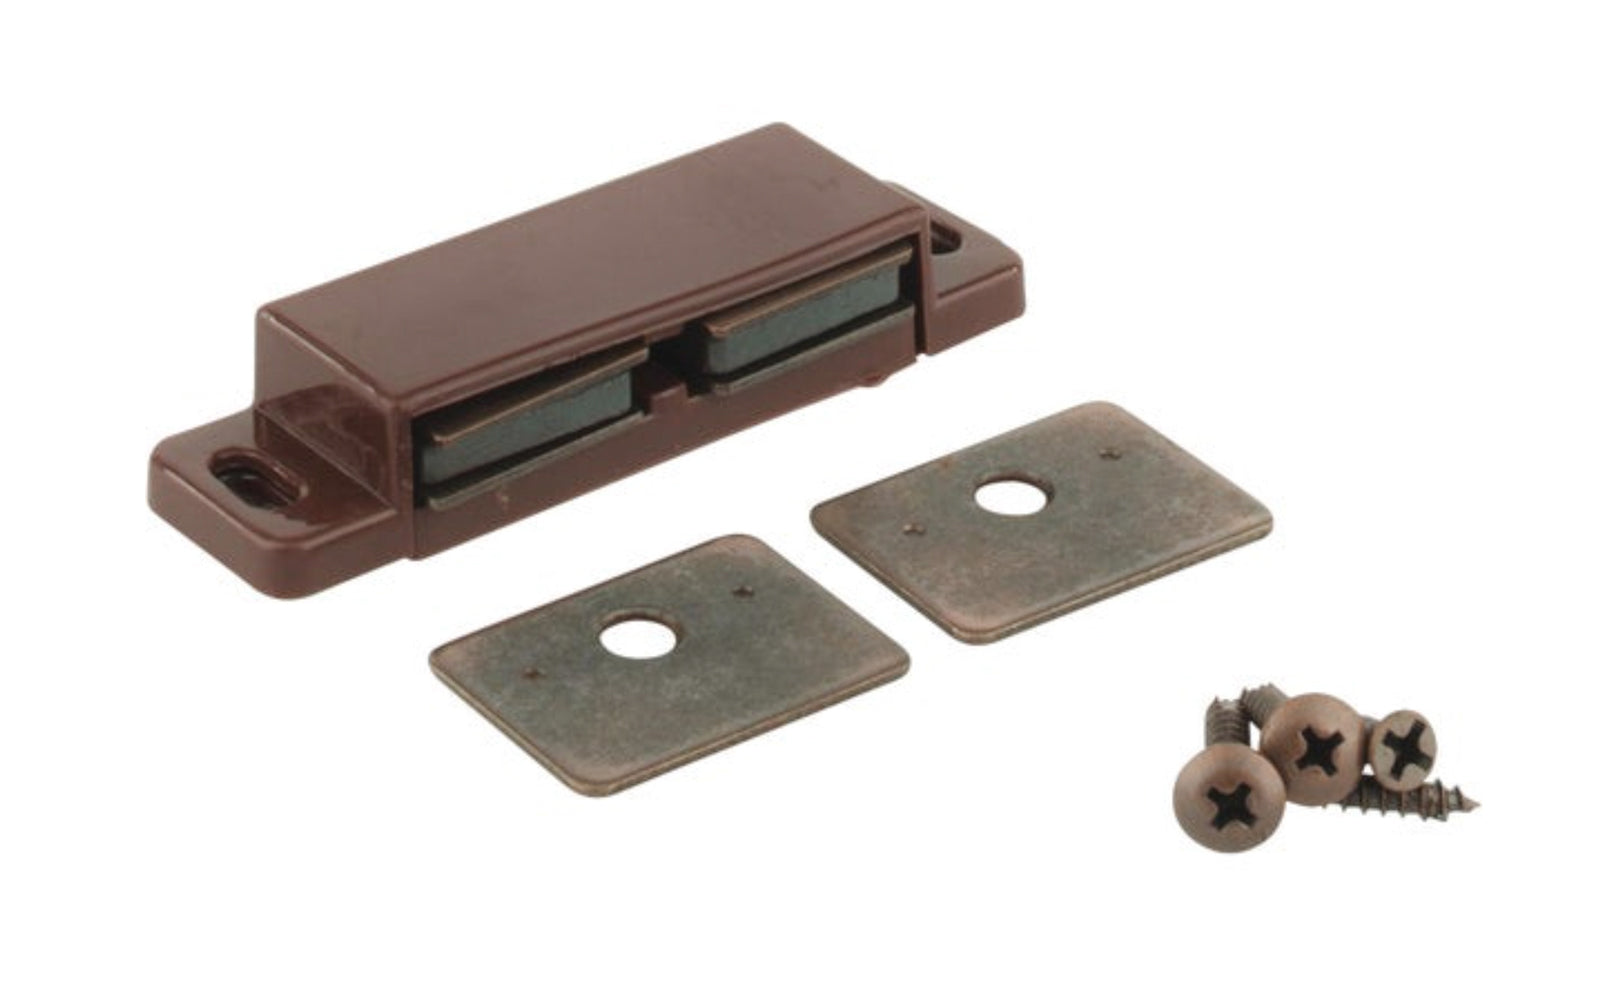 KasaWare Brown Double Magnetic Catches in a plastic housing. Sold as 2 pack. KasaWare Brown Double Magnetic Catch - 2 Pack. Model KFCMD-A-BR2. 843512068256